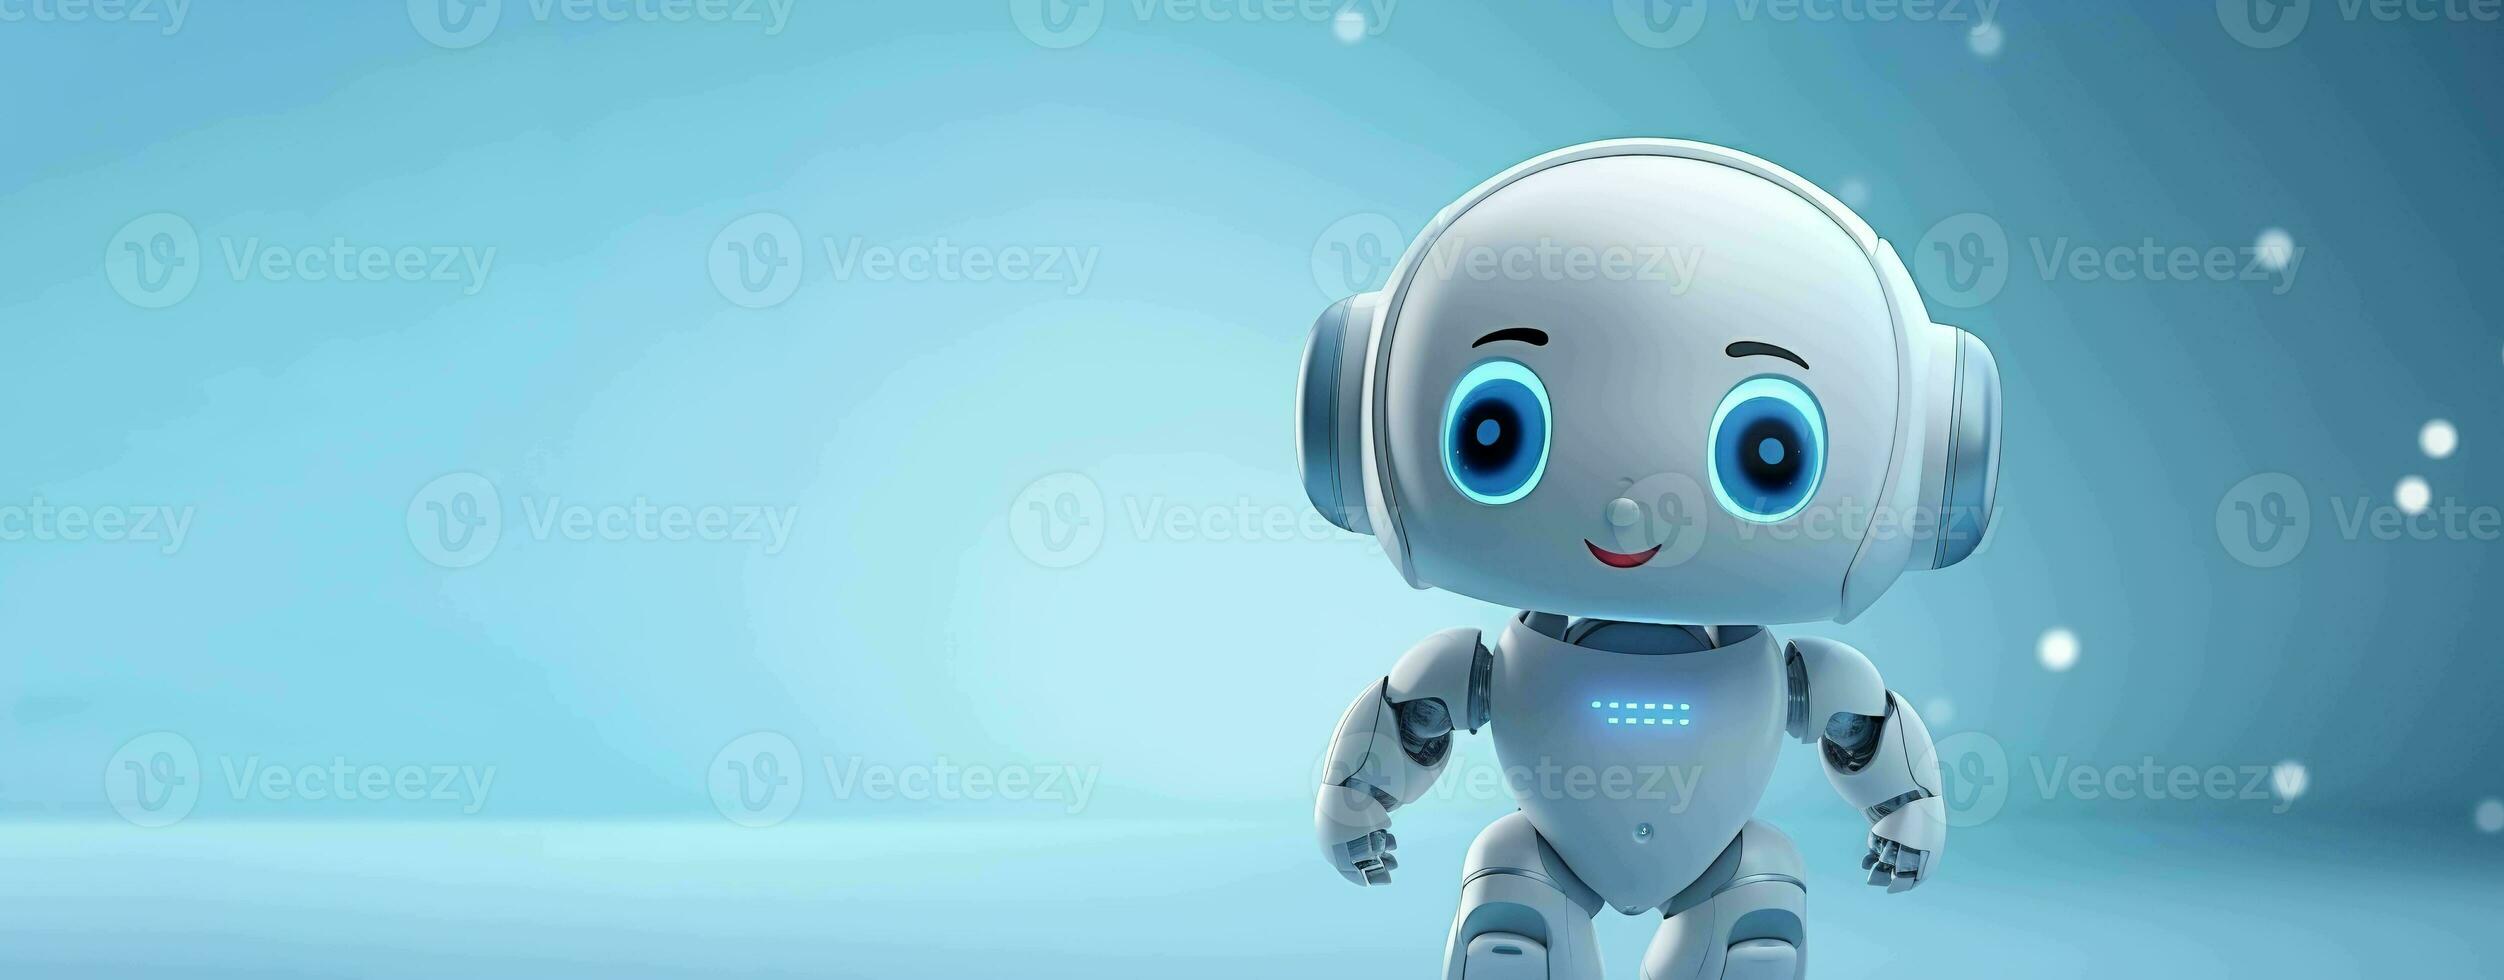 Cute Positive Robot Isolated on the Minimalist Background with Copy Space photo